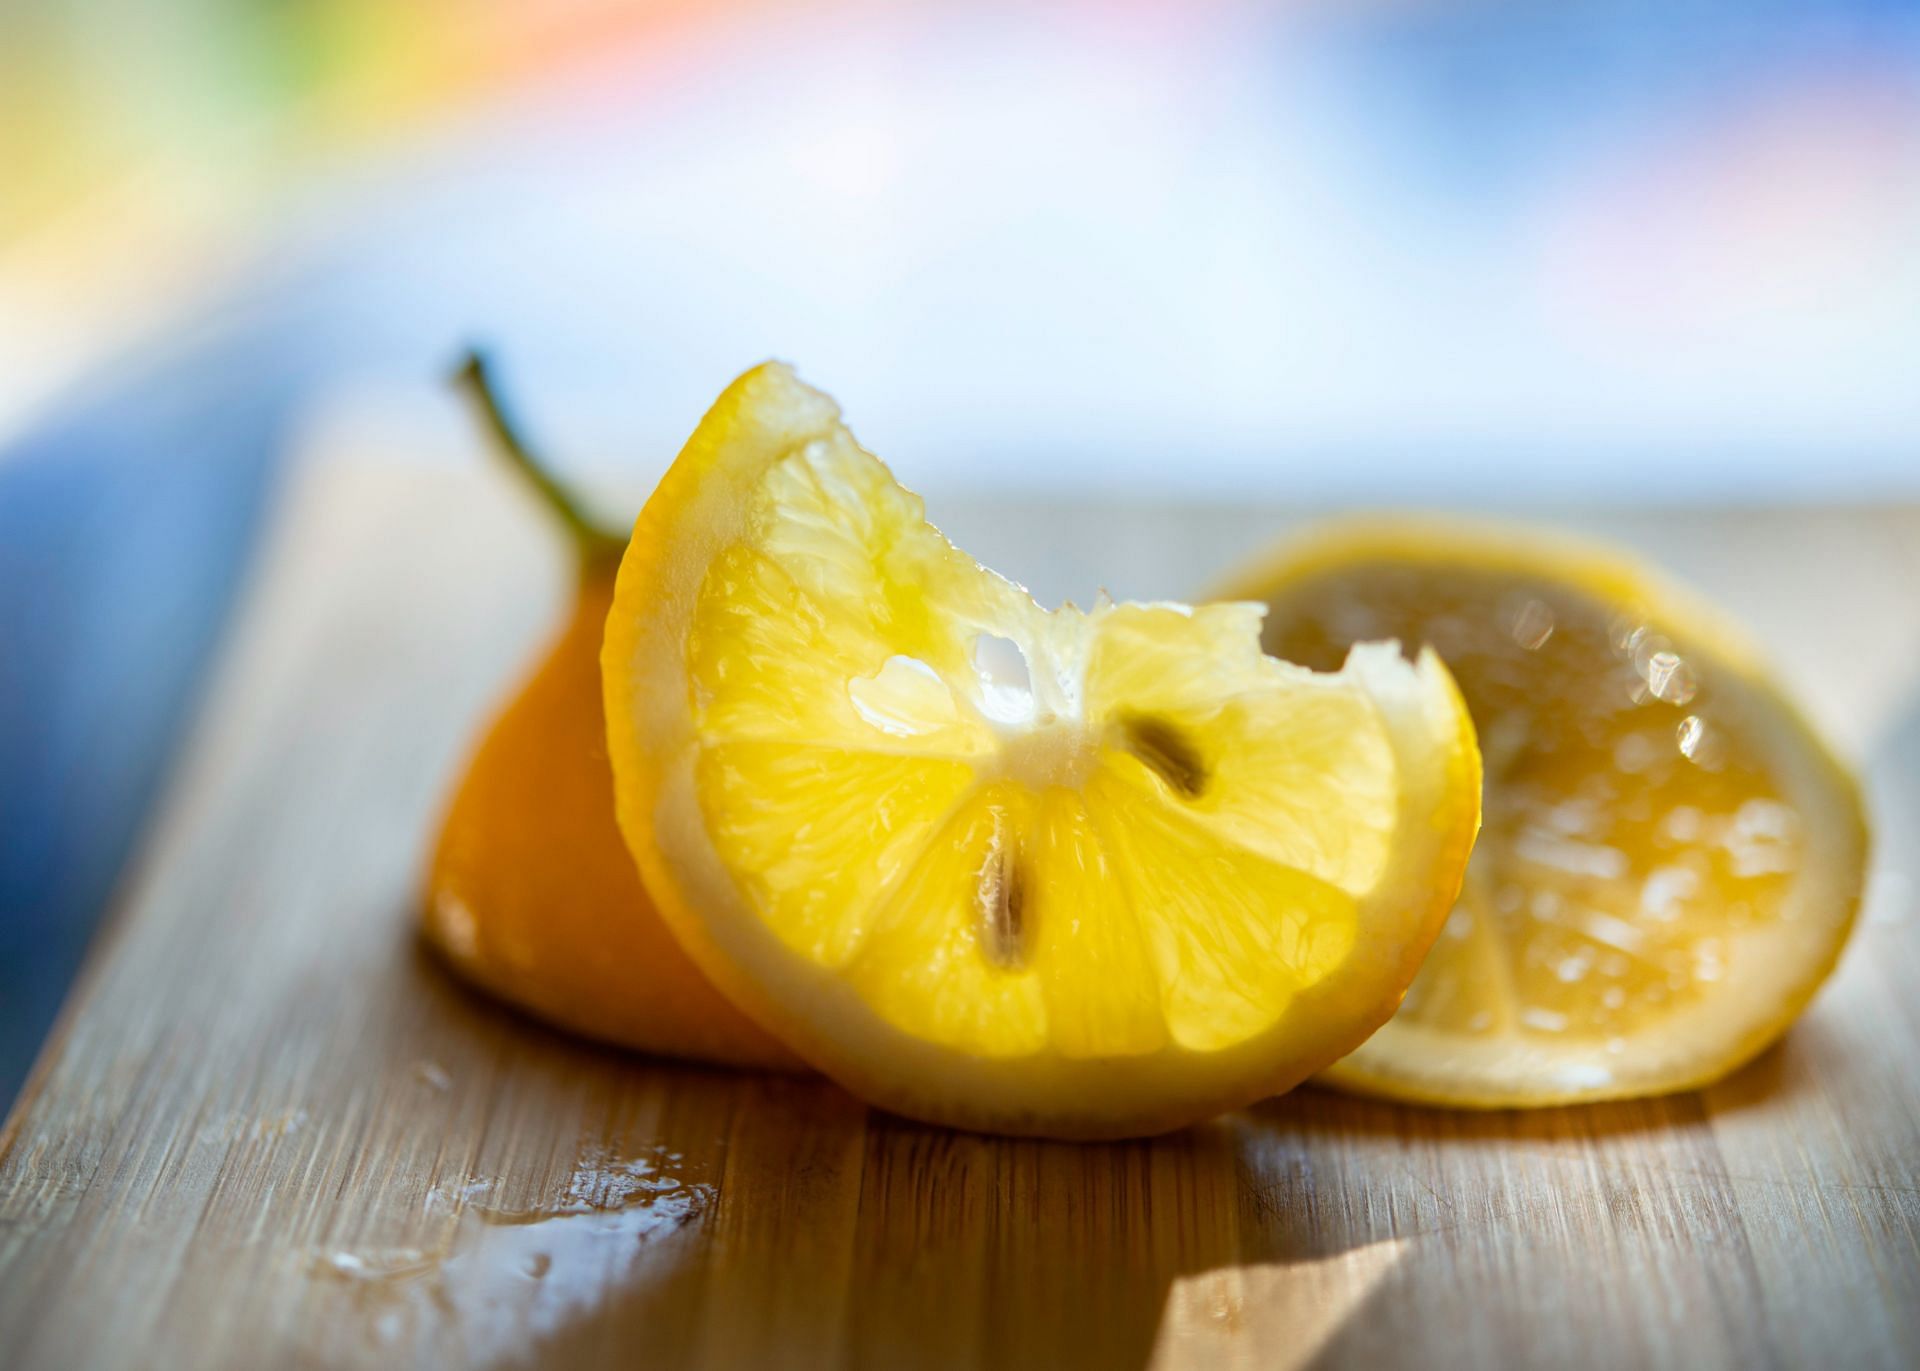 Lemons are nutritious and a rich source of antioxidants (Image via Unsplash/Cristina Anne Costello)